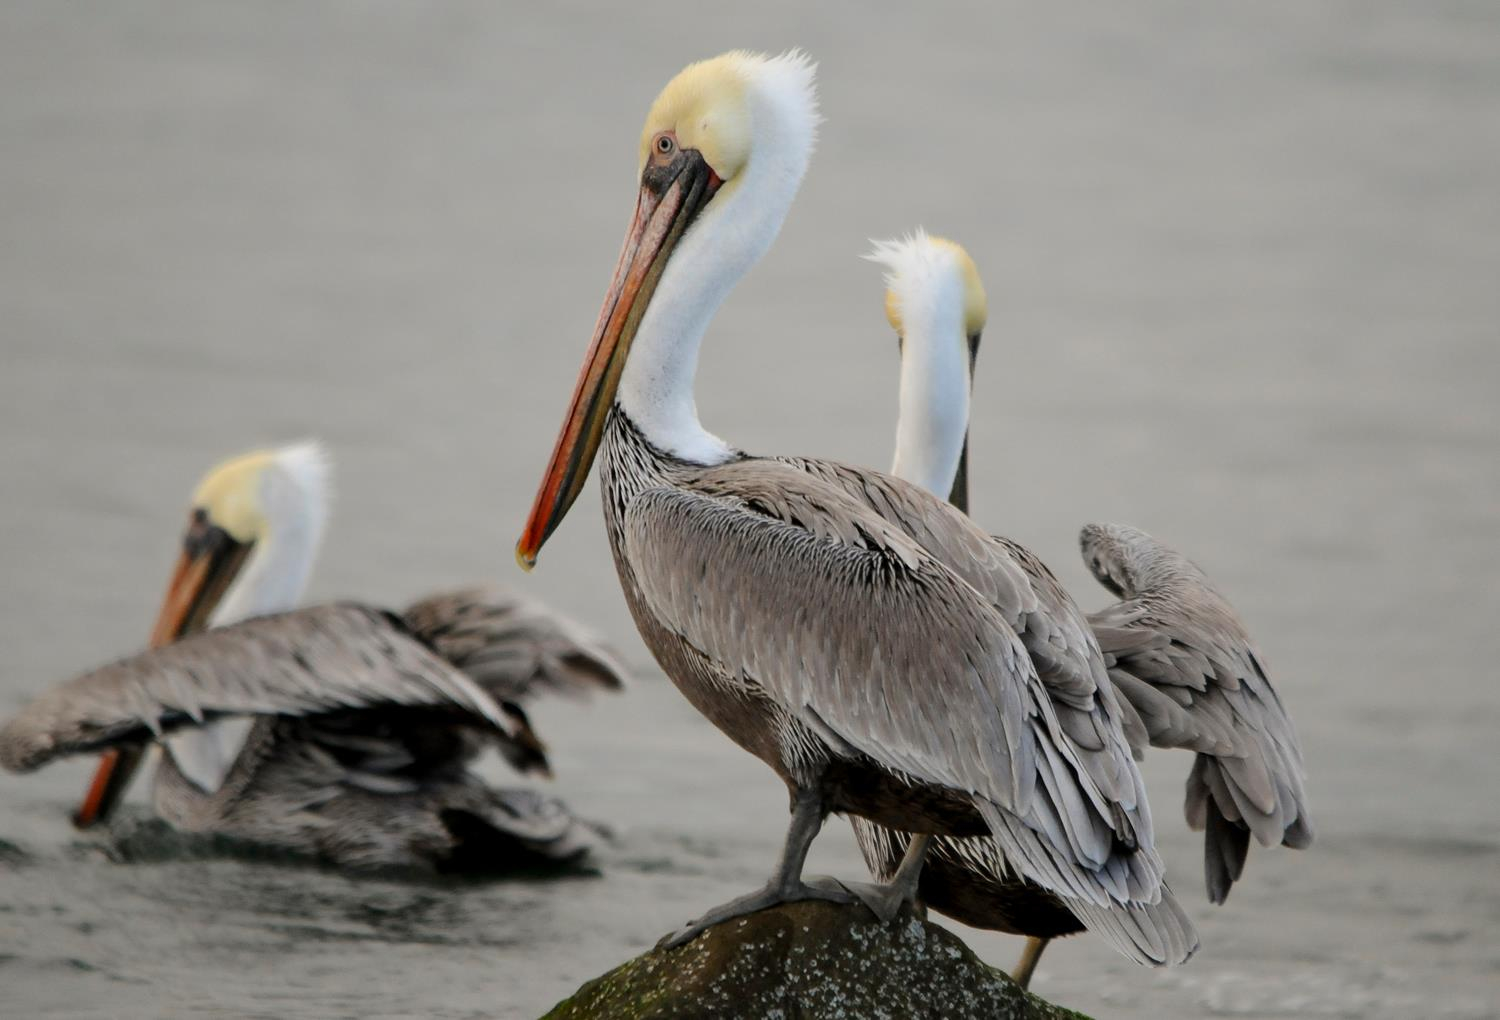 Three brown pelicans have plump brown bodies, long curved white necks, and long straight yellow bills along the Oregon Coast.